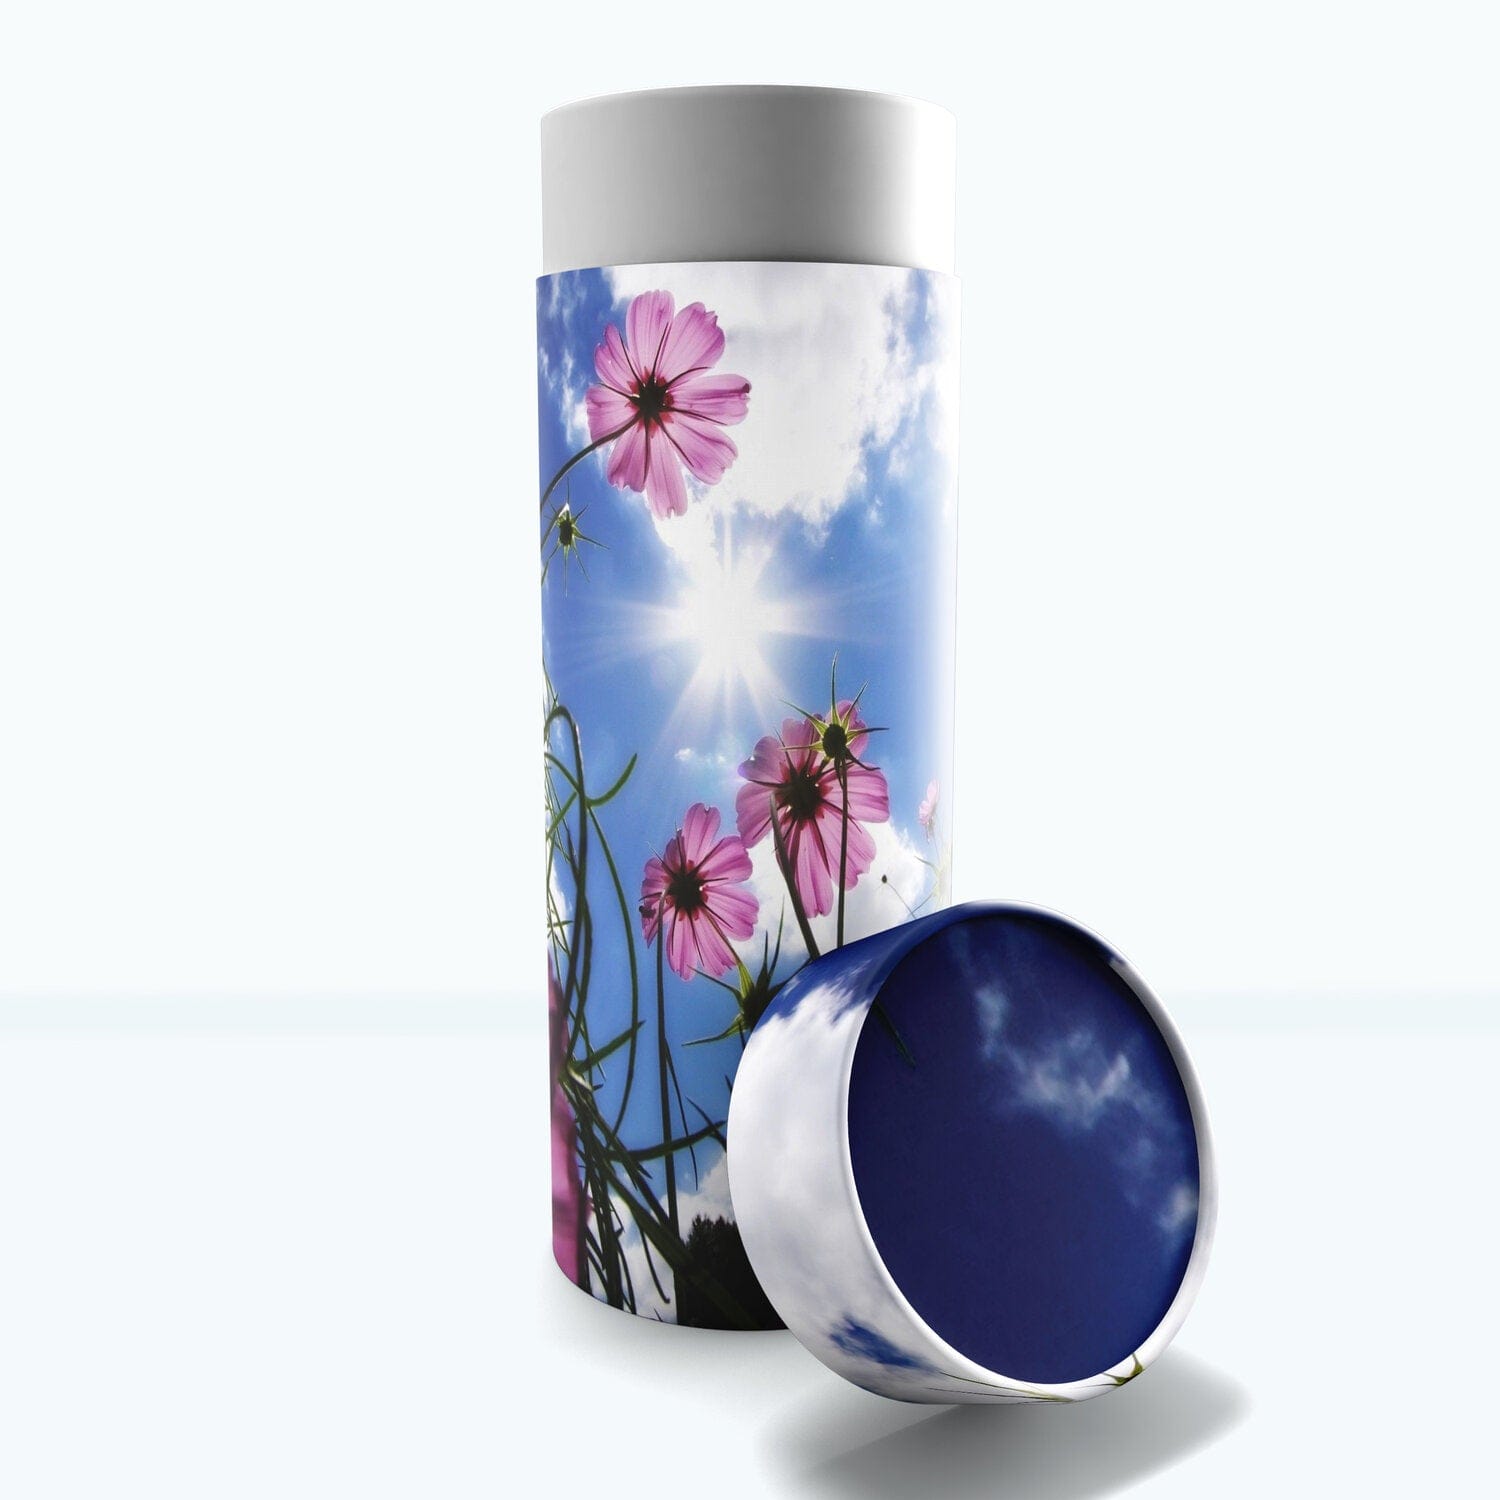 Commemorative Cremation Urns Large Morning Glories - Biodegradable & Eco Friendly Burial or Scattering Urn / Tube